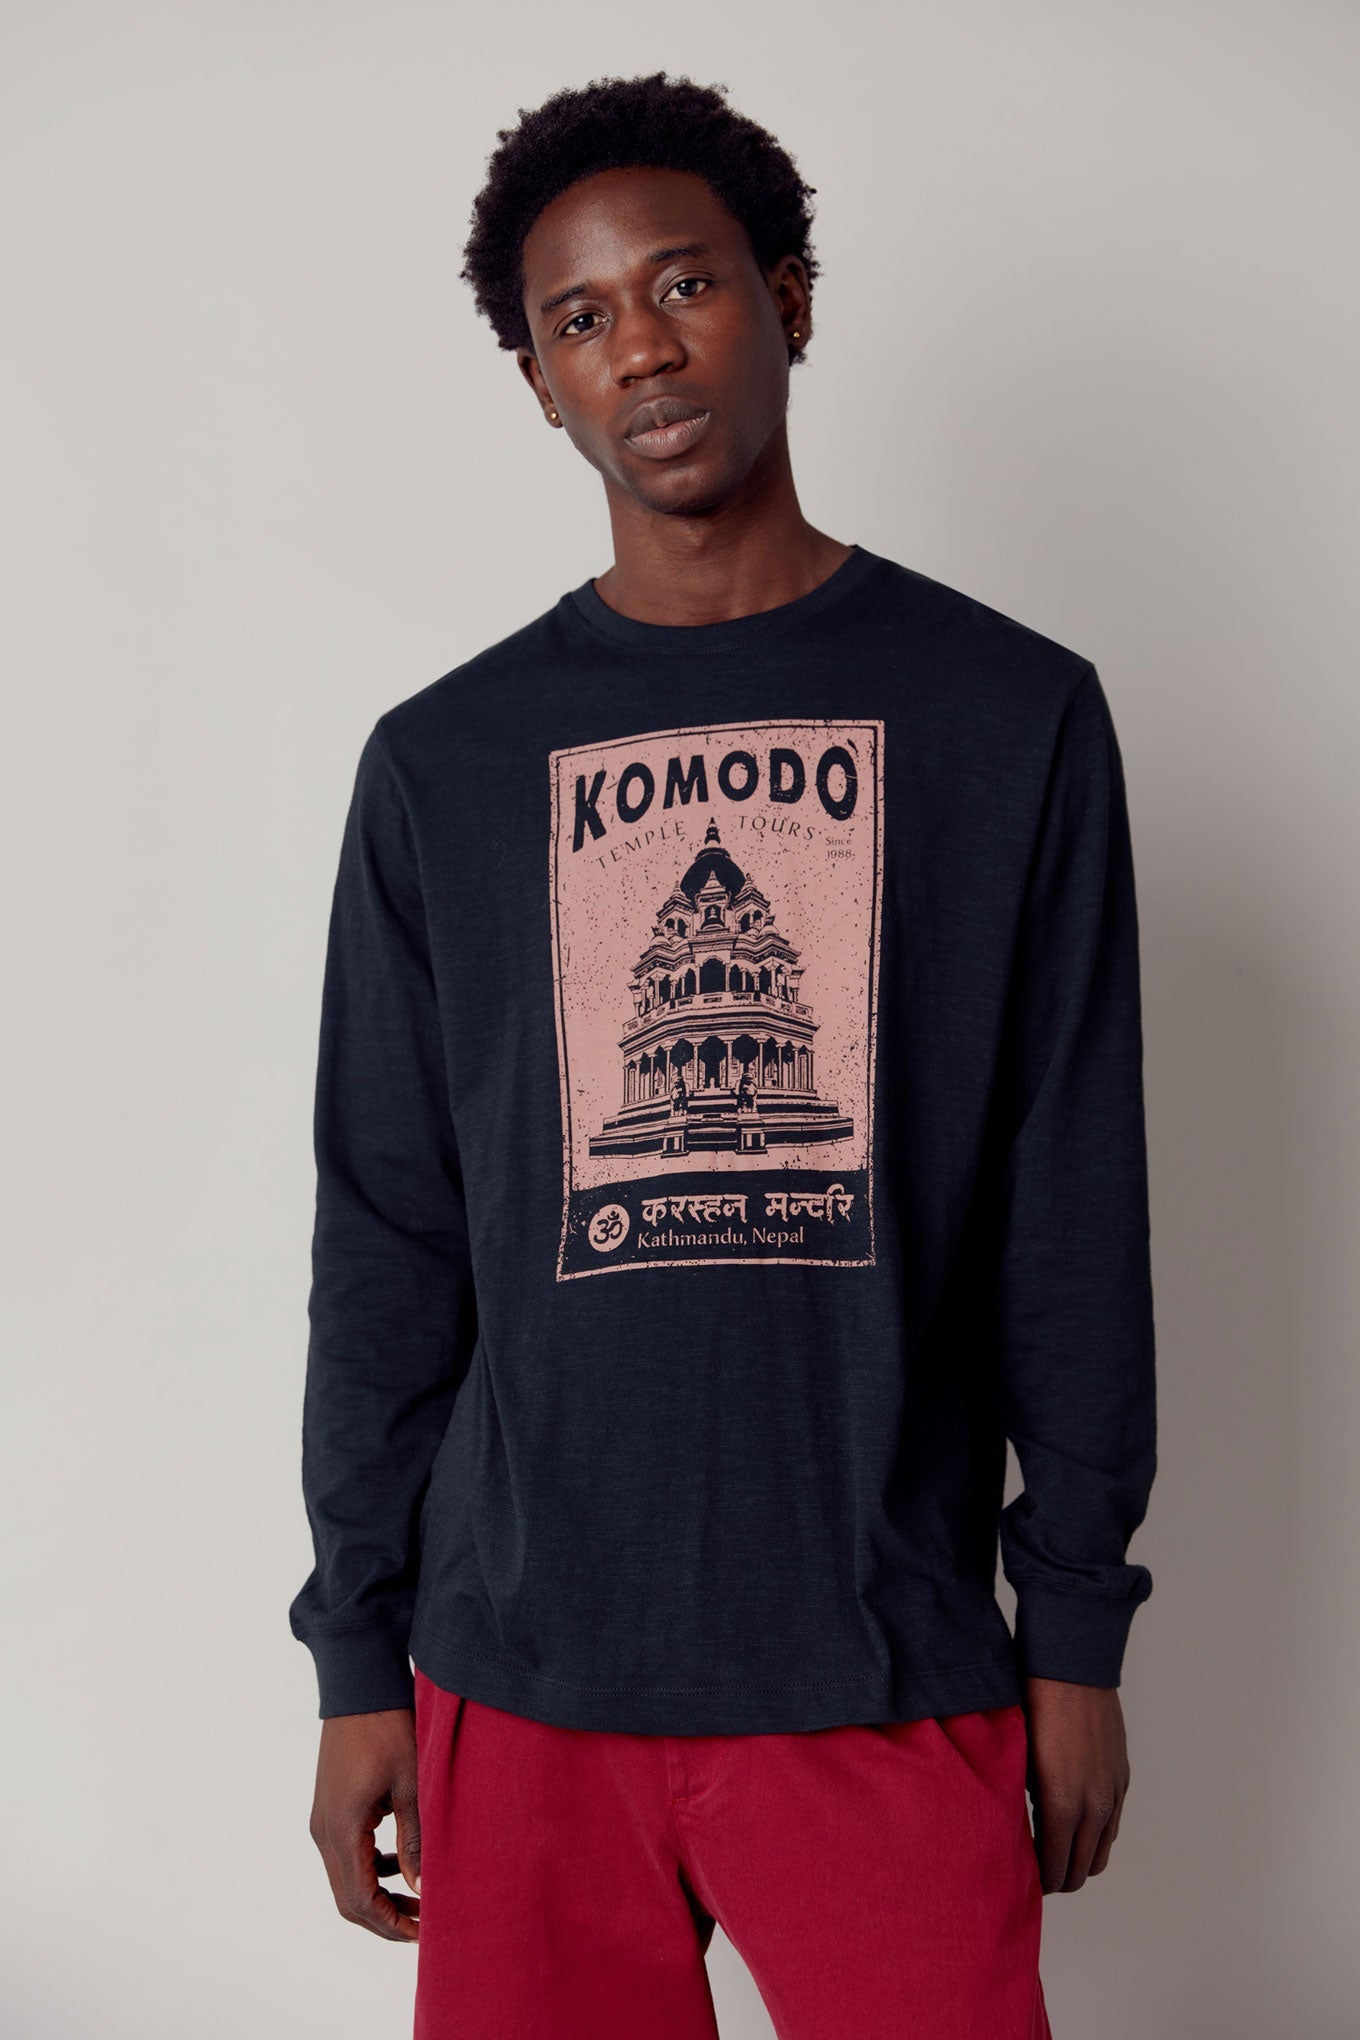 Black sweater DUNBAR TEMPLE made from 100% organic cotton by Komodo-